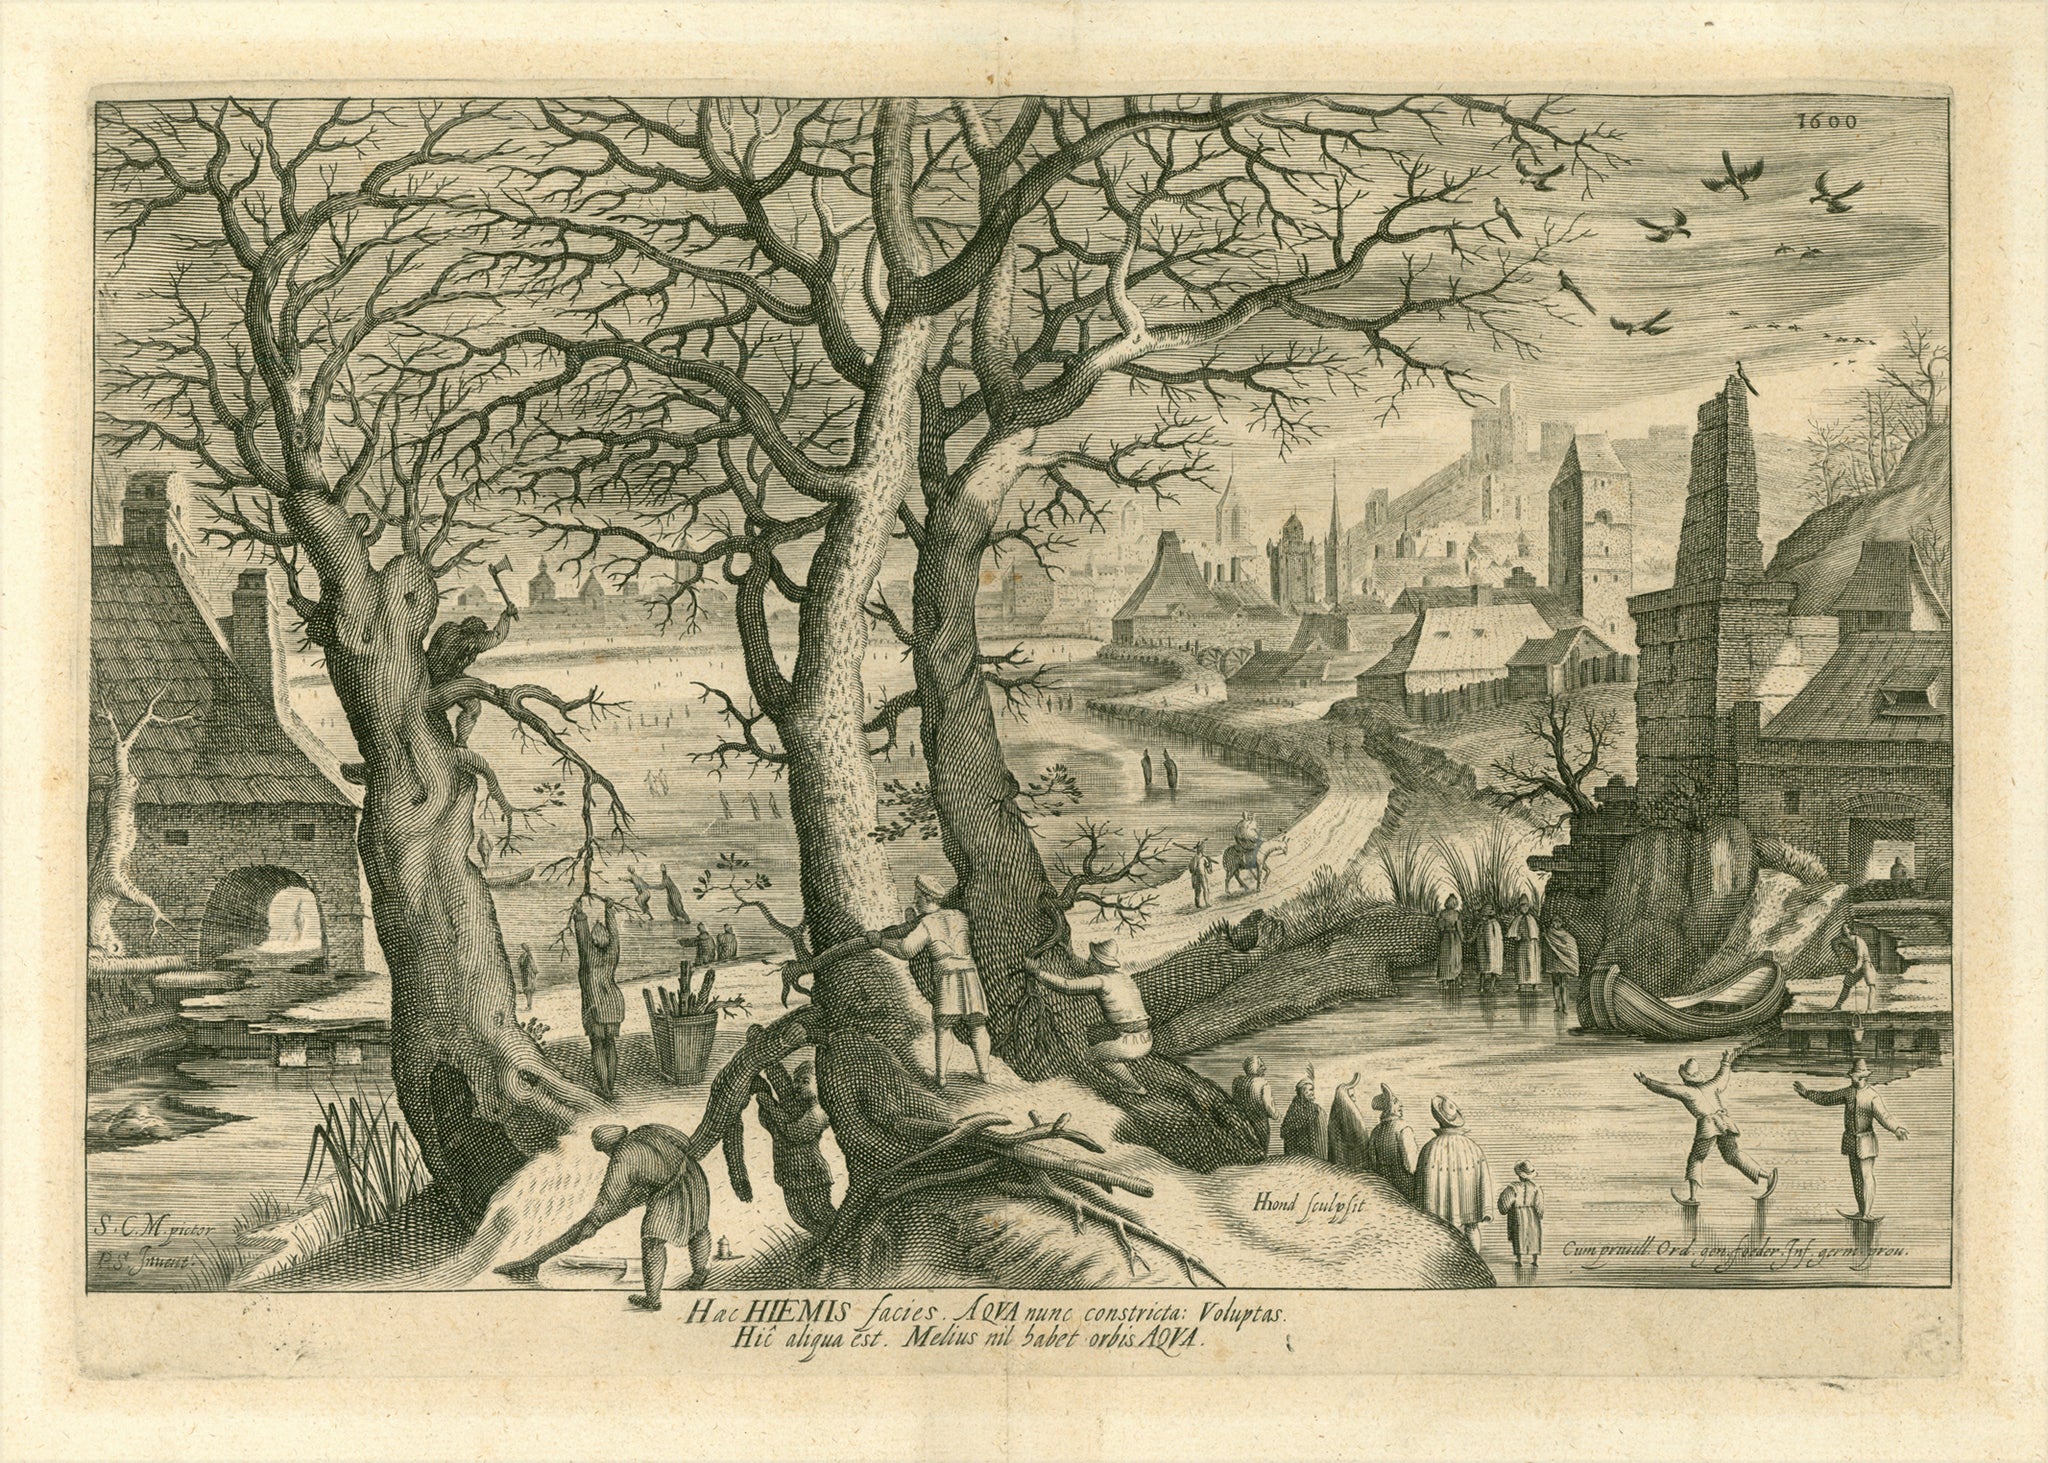 "Hac Hiemis facies. Aqua nunc constricta: Voluptas Hic aliqua est. Melius nil habet orbis Aqua"  Copper etching by Hendrik de Hondt, the older (1573-1649) - Engraver, artist and publisher  Lower left corner monograms: S.C.M pictor and PS invent  Lower right corner: Cum privill. Ord. ten. fodder. Inf. germ. prov.  Translation: Here we see the face of winter. The water is now frozen. Da gibt es Vergnügen. Gut, sass es Wasser gibt. (Very superficially translated)  Latanized the Hondius family was an important 